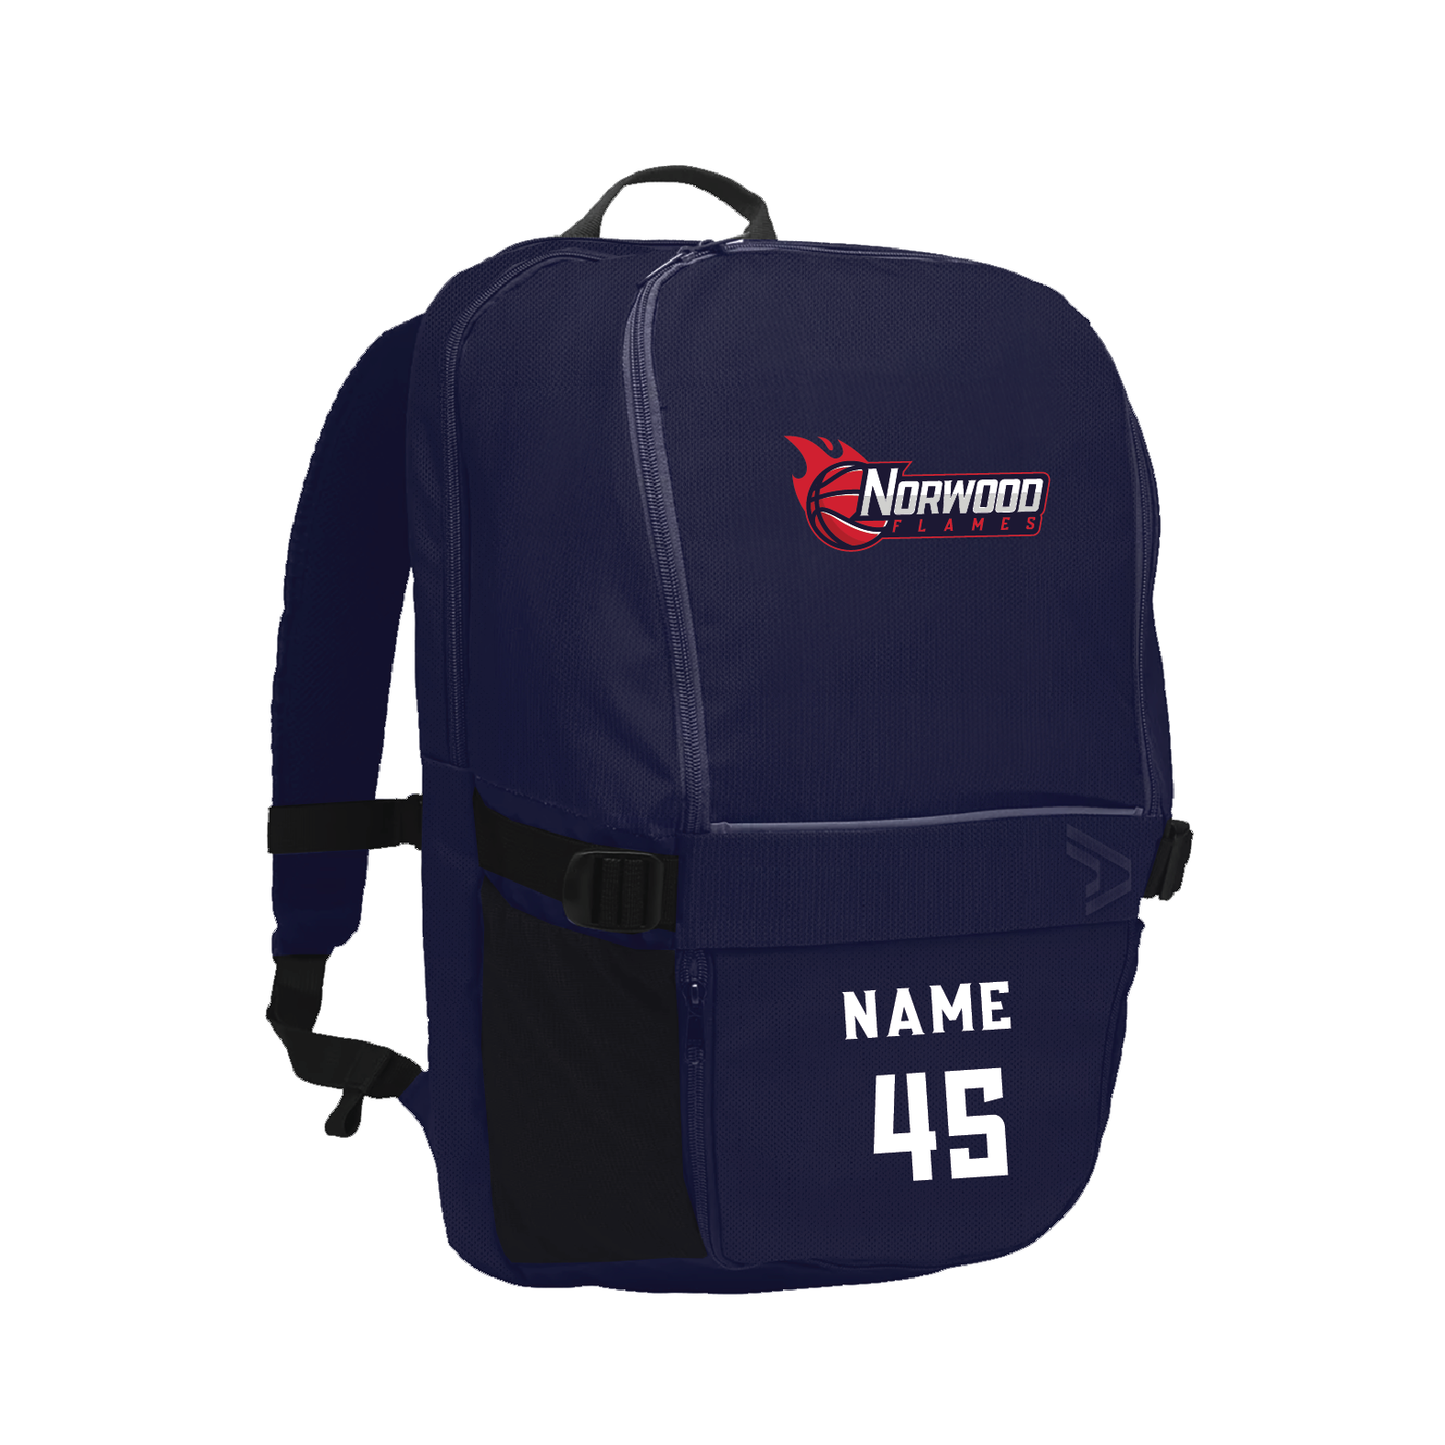 NORWOOD FLAMES - BACK PACK WITH LOGO INITIALS & NUMBER